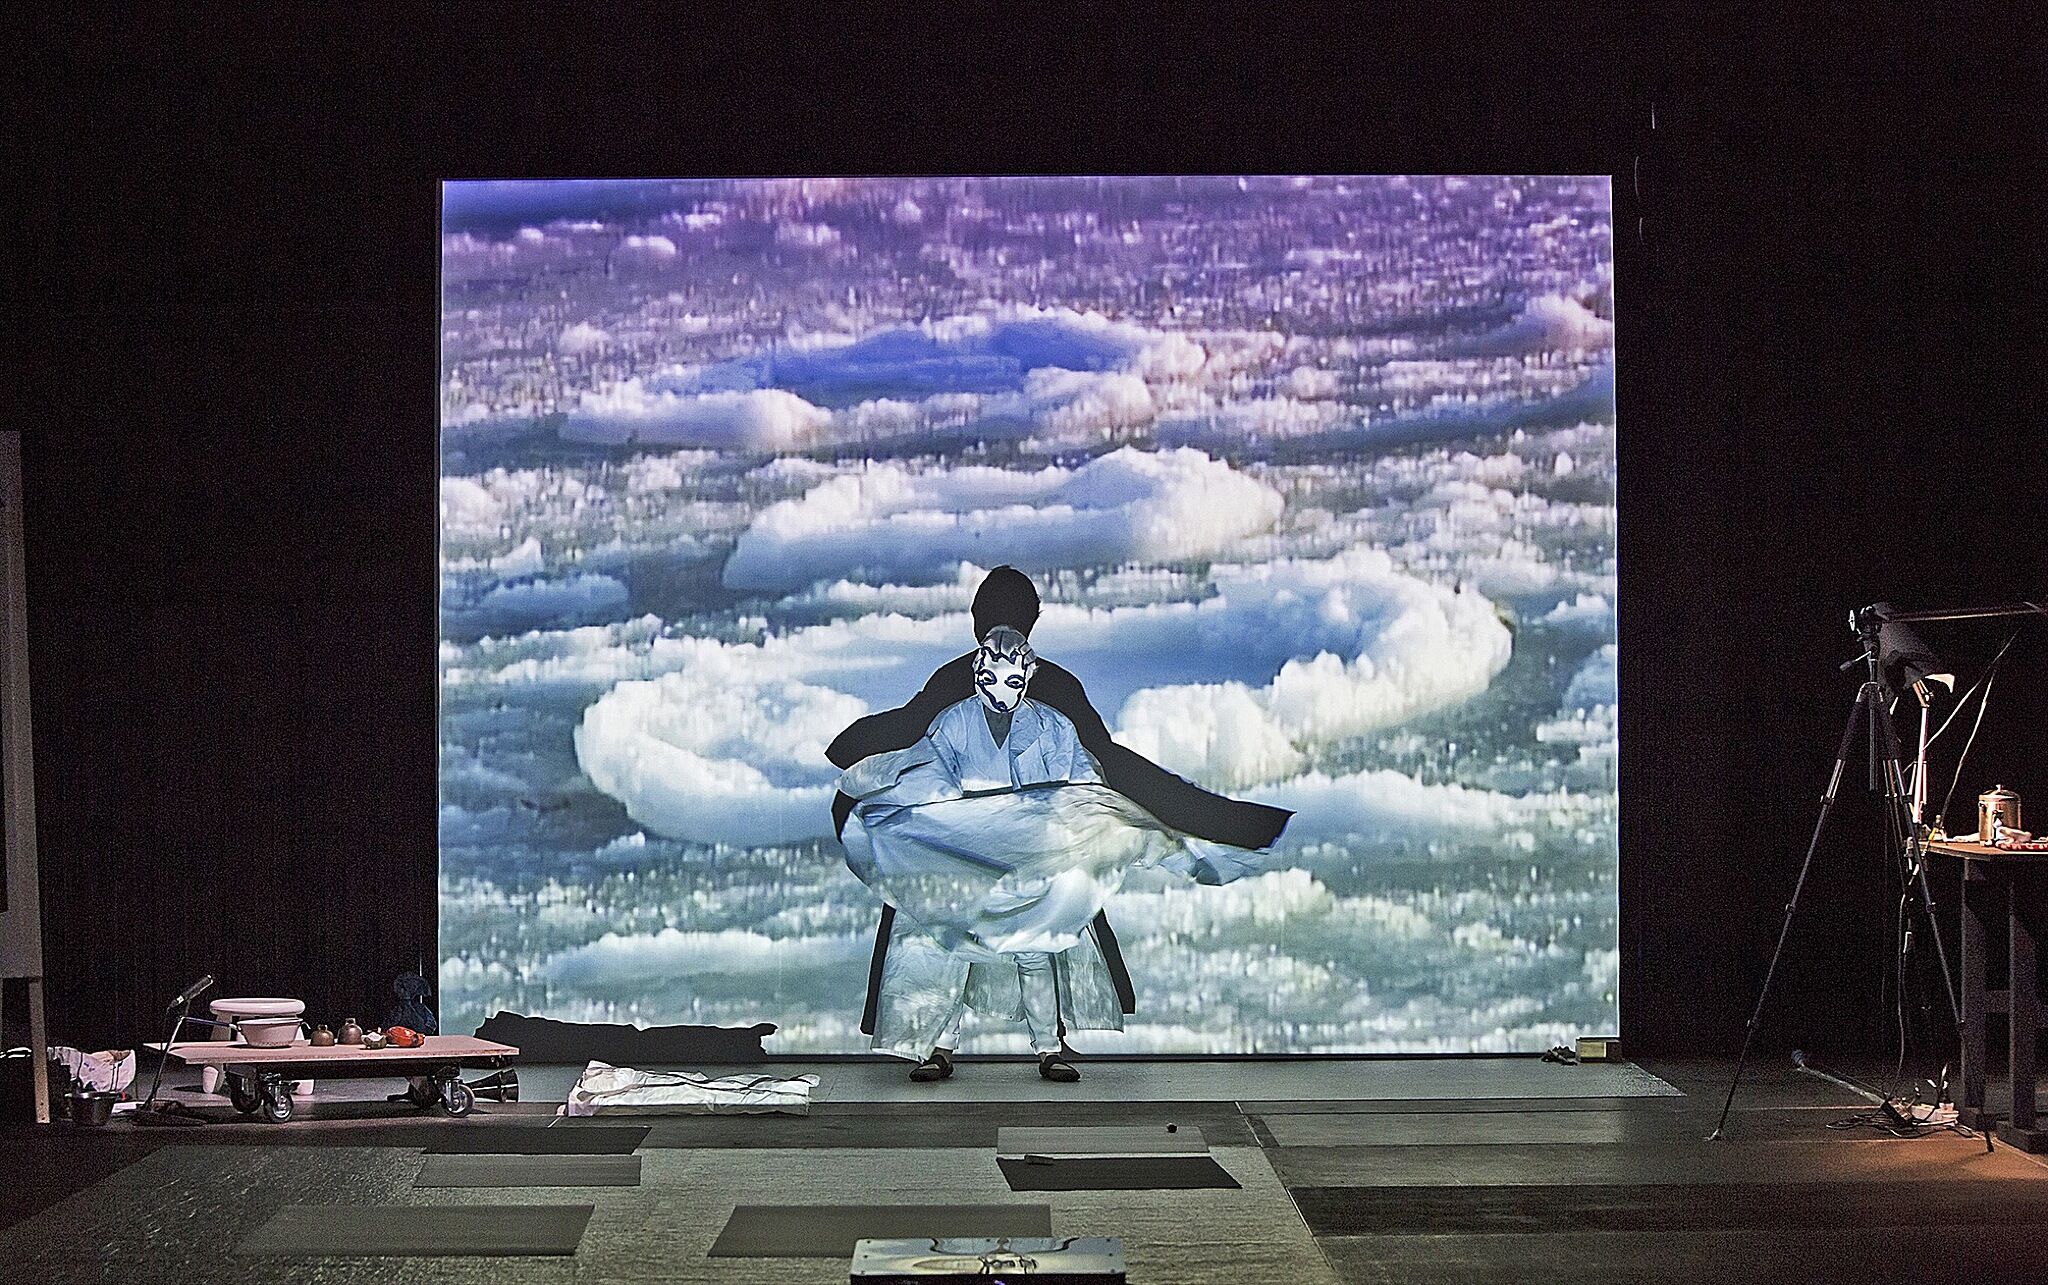 An image of a person on stage with a video being projected onto them